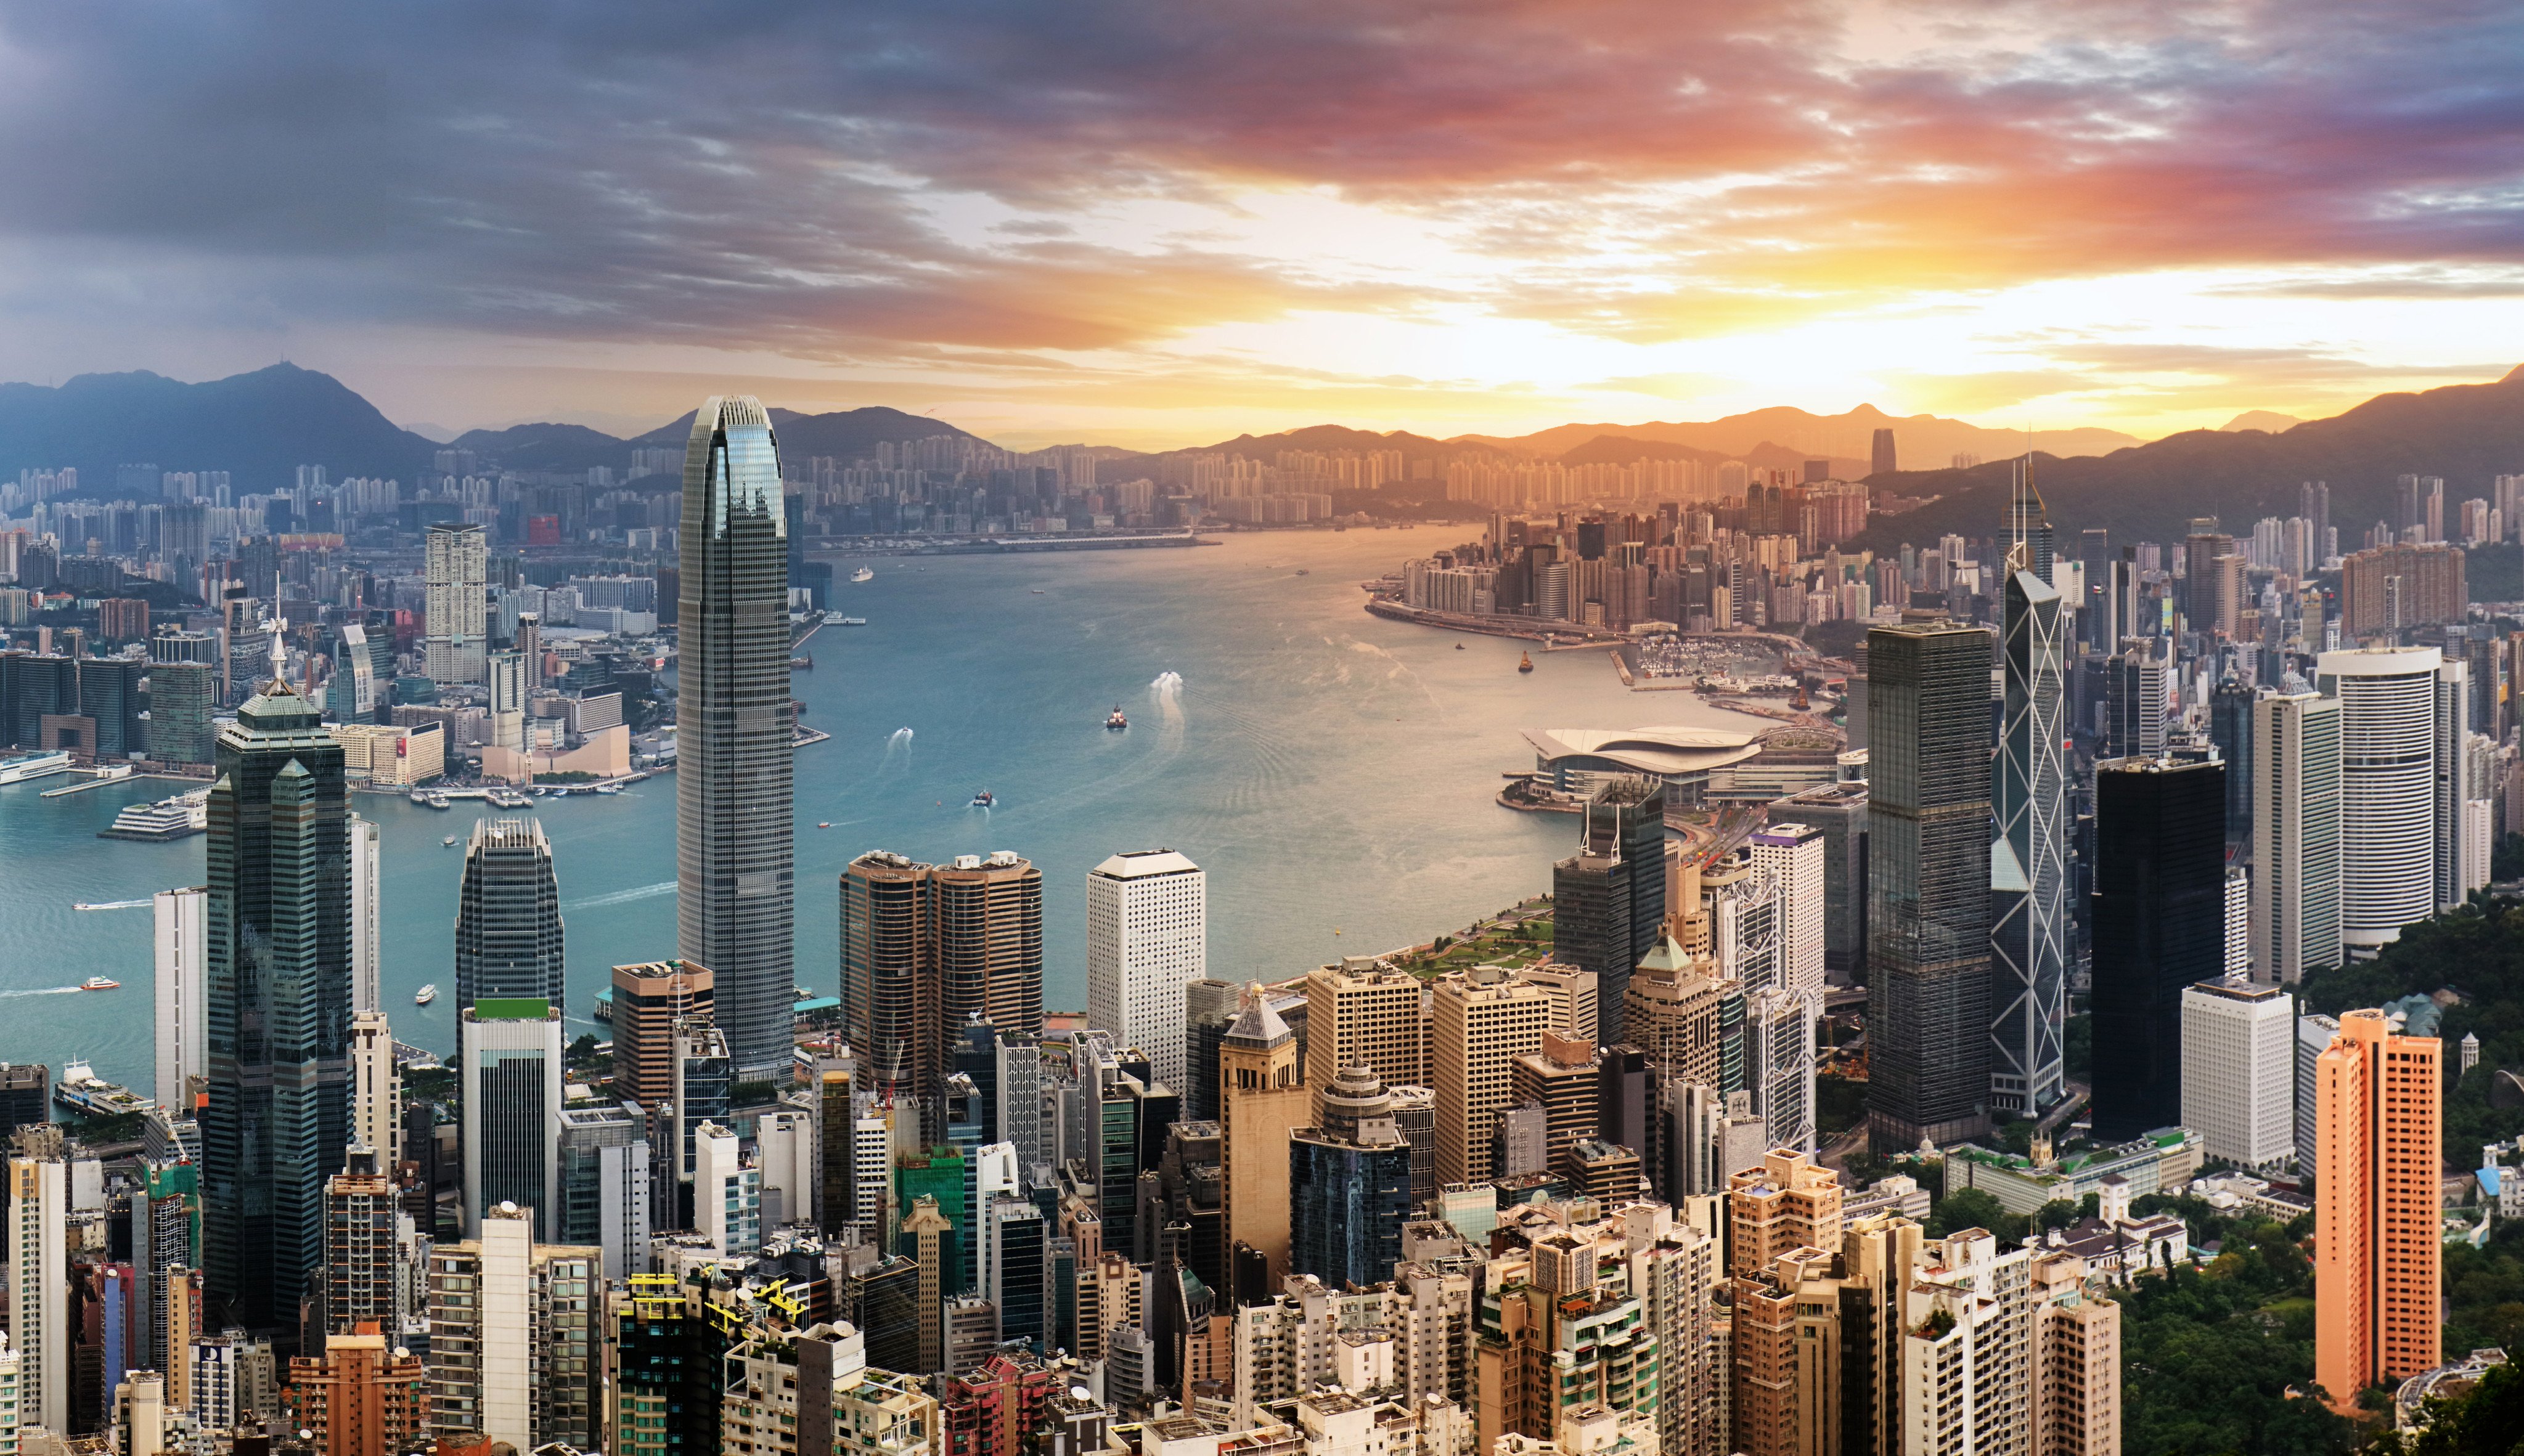 Hong Kong, which last year handled more than 7 per cent of US exports to mainland China worth US$13.7 billion, must adapt to change if it wishes to continue as an important connector between the nation and the rest of the world. Photo: Shutterstock